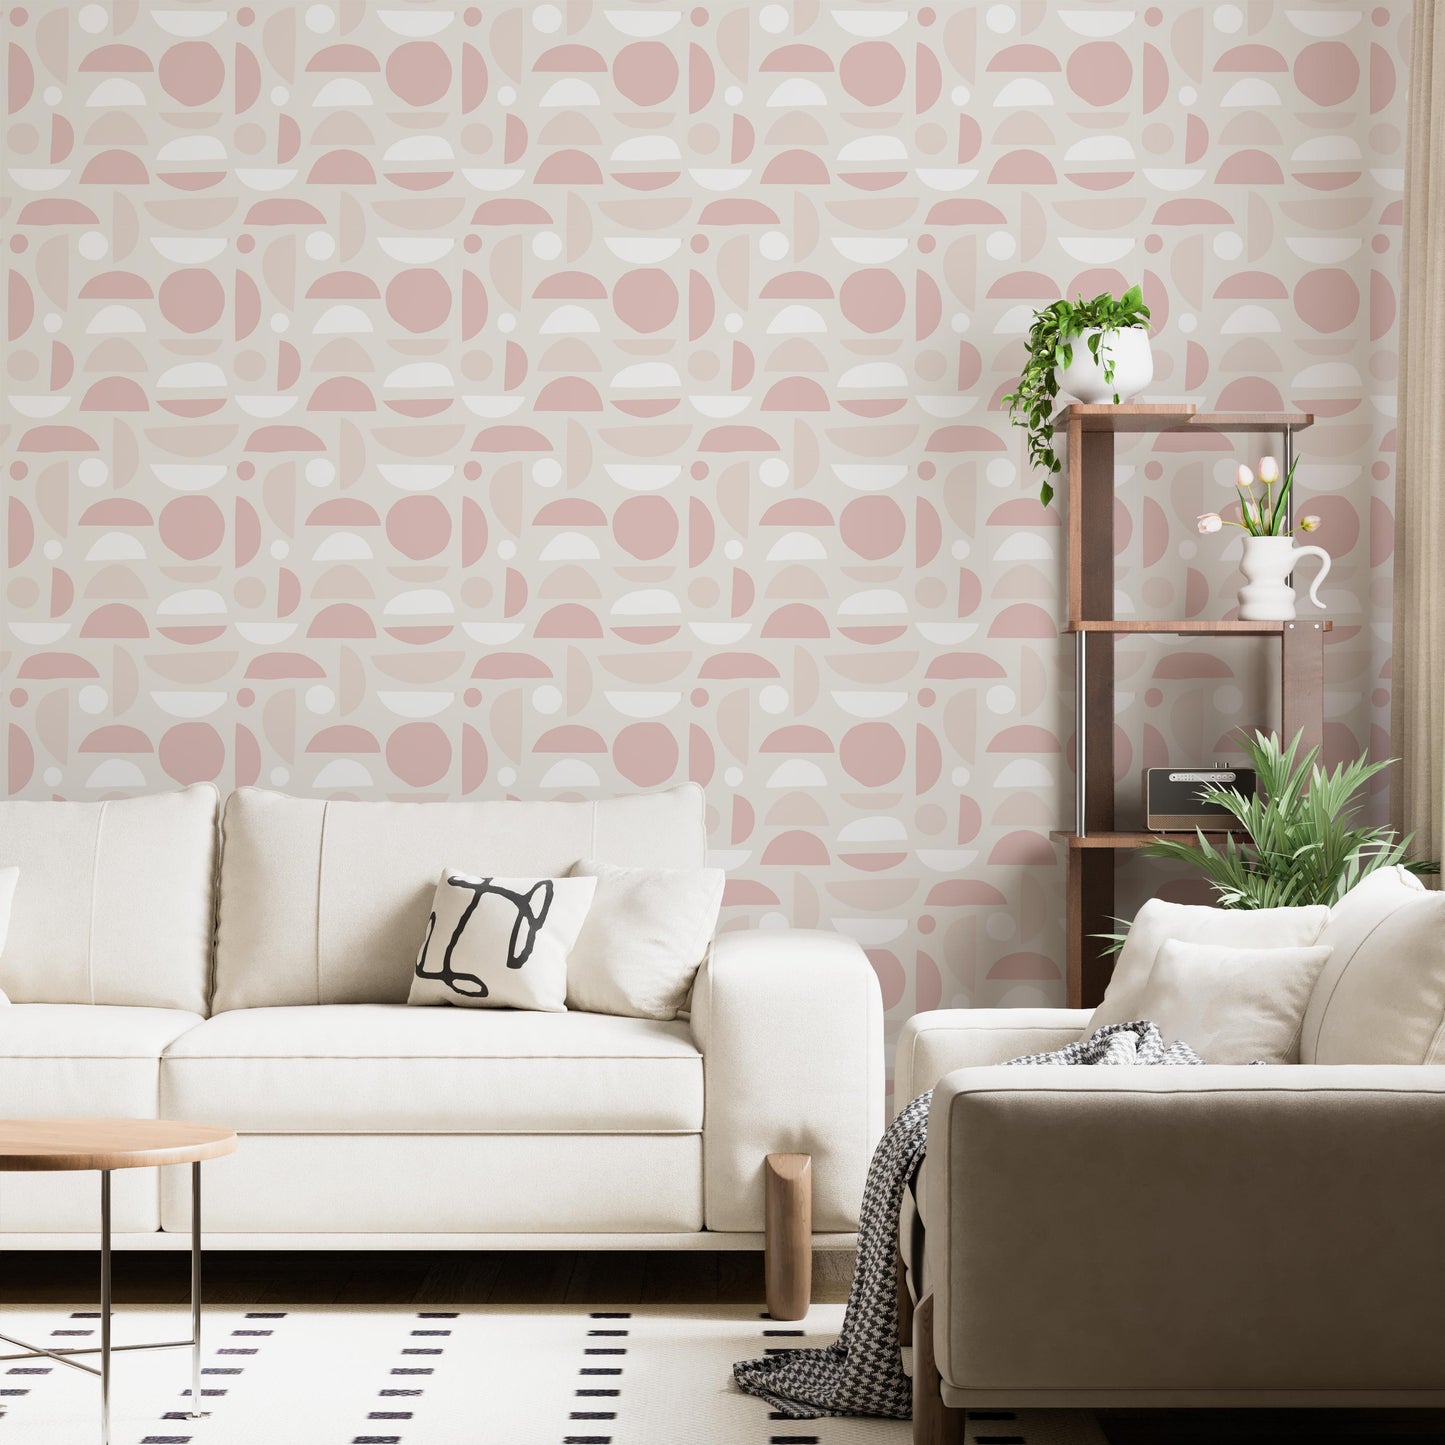 Mid-Century Modern Pink Bedroom Wallpaper - Removable Peel and Stick Accent Wall Wallpaper